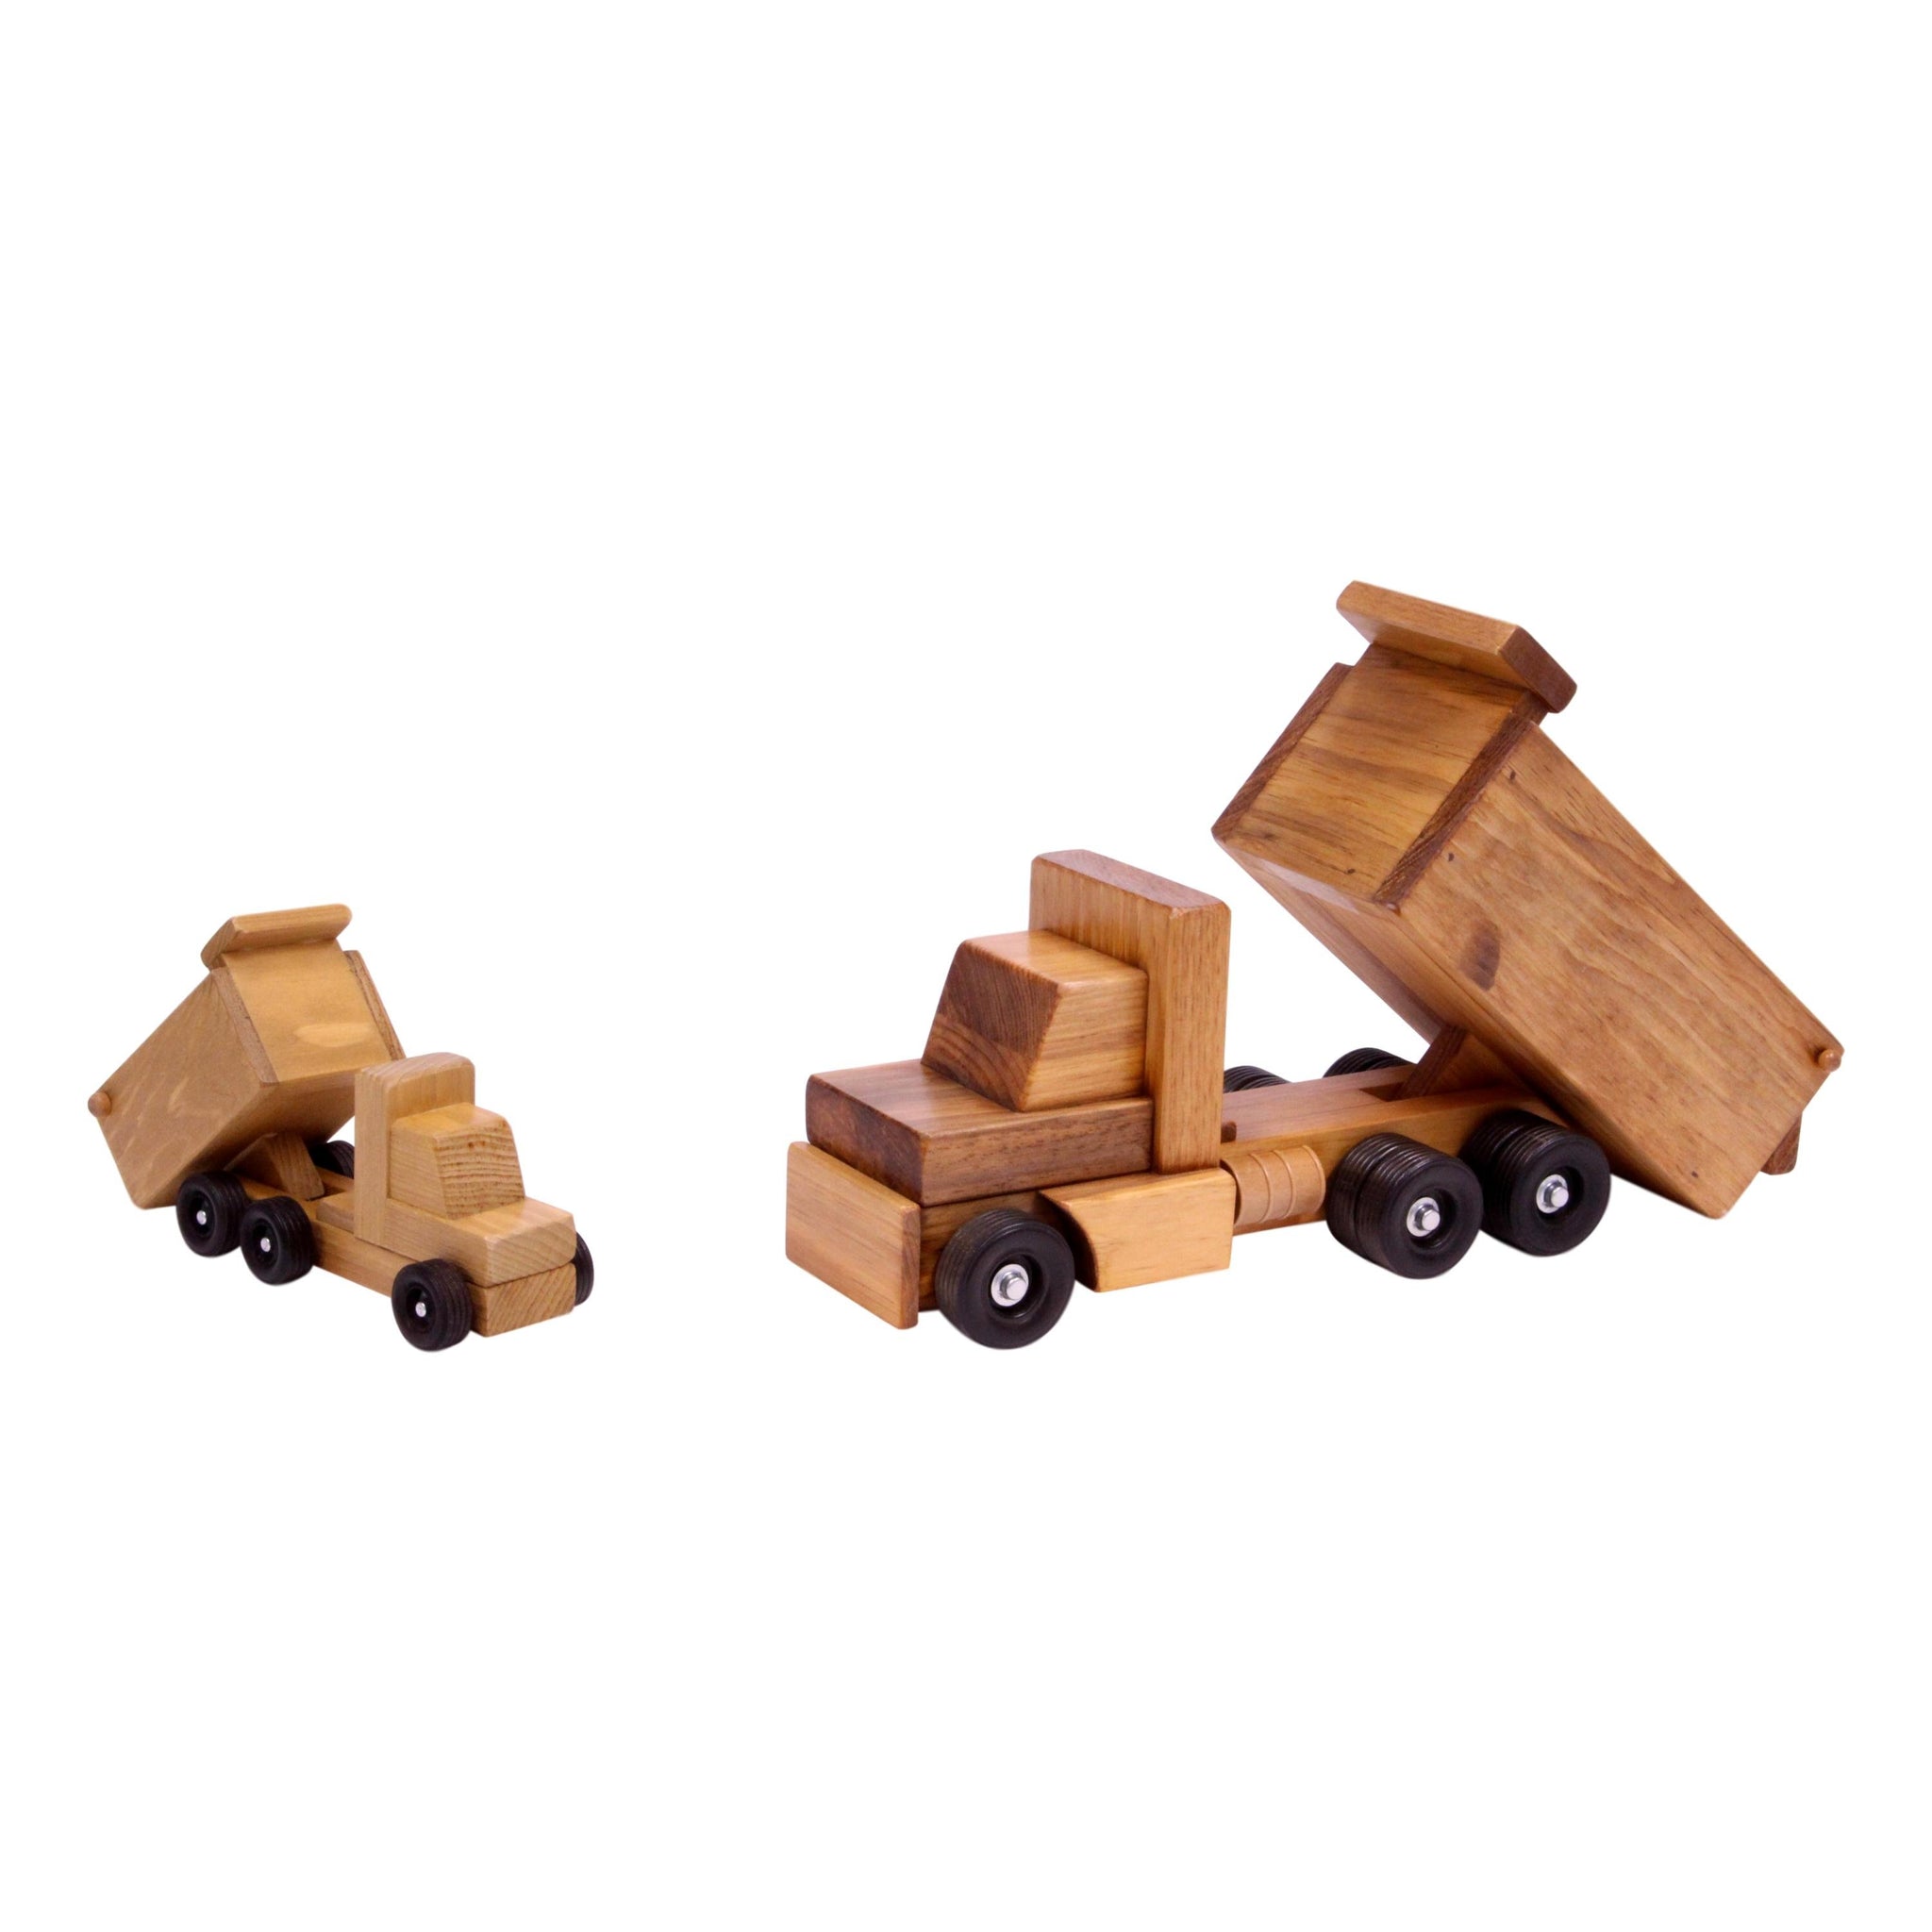 Amish-made Wooden Dump Truck Toy with Non-toxic Finish –